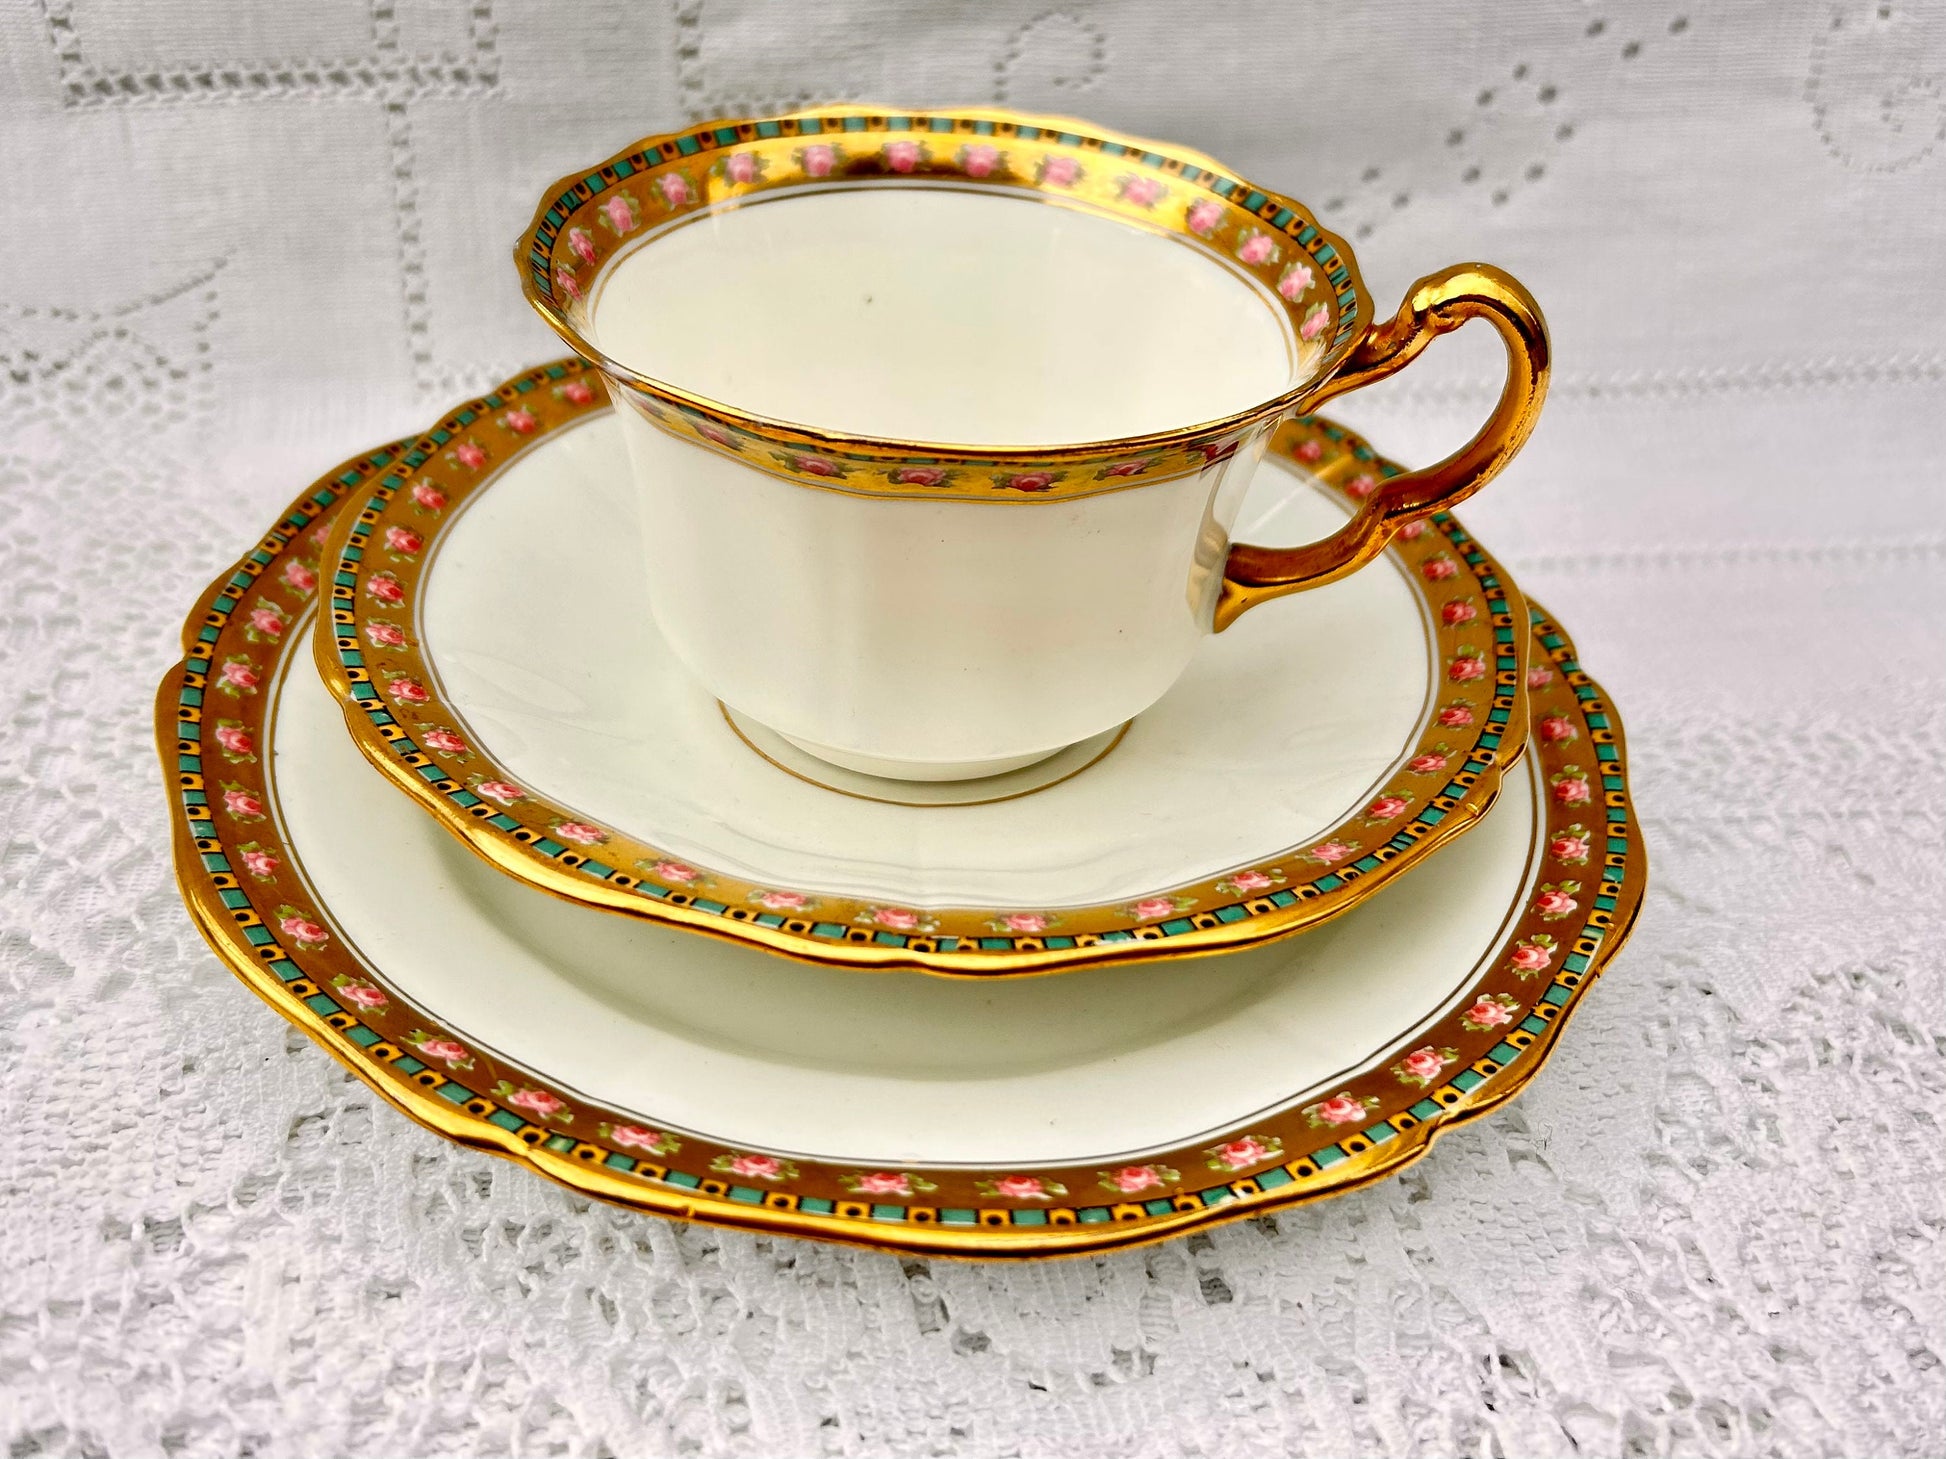 A pretty Vintage China teacup & saucer set with tea plate, white base gold rim pink roses E Hughes, England